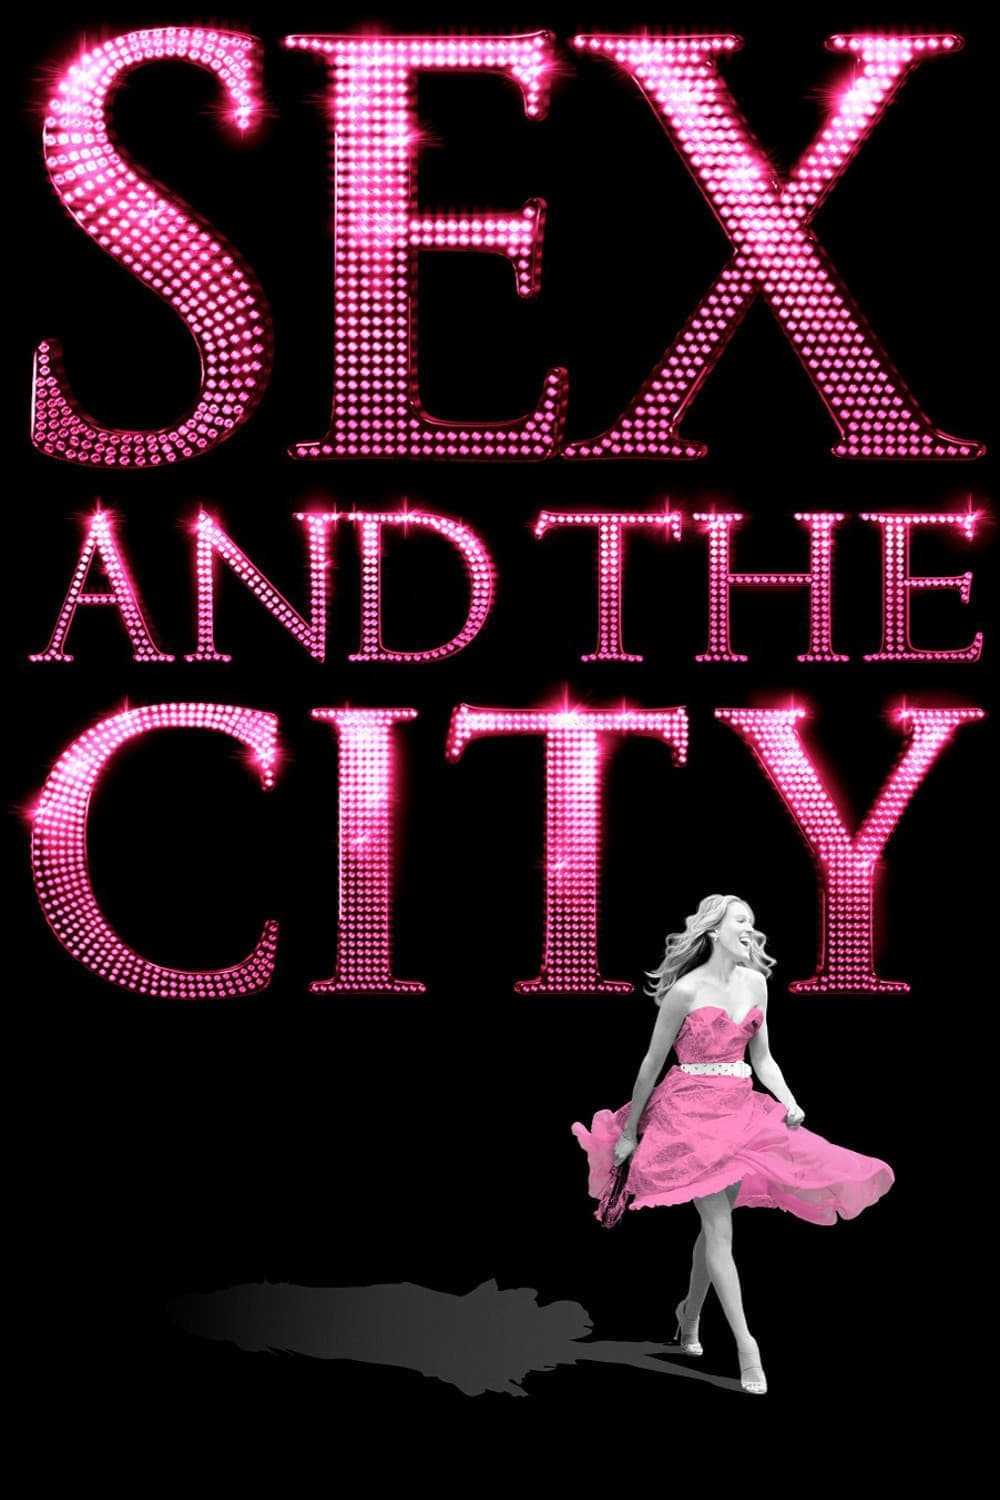 Sex and the City - Der Film (2008)